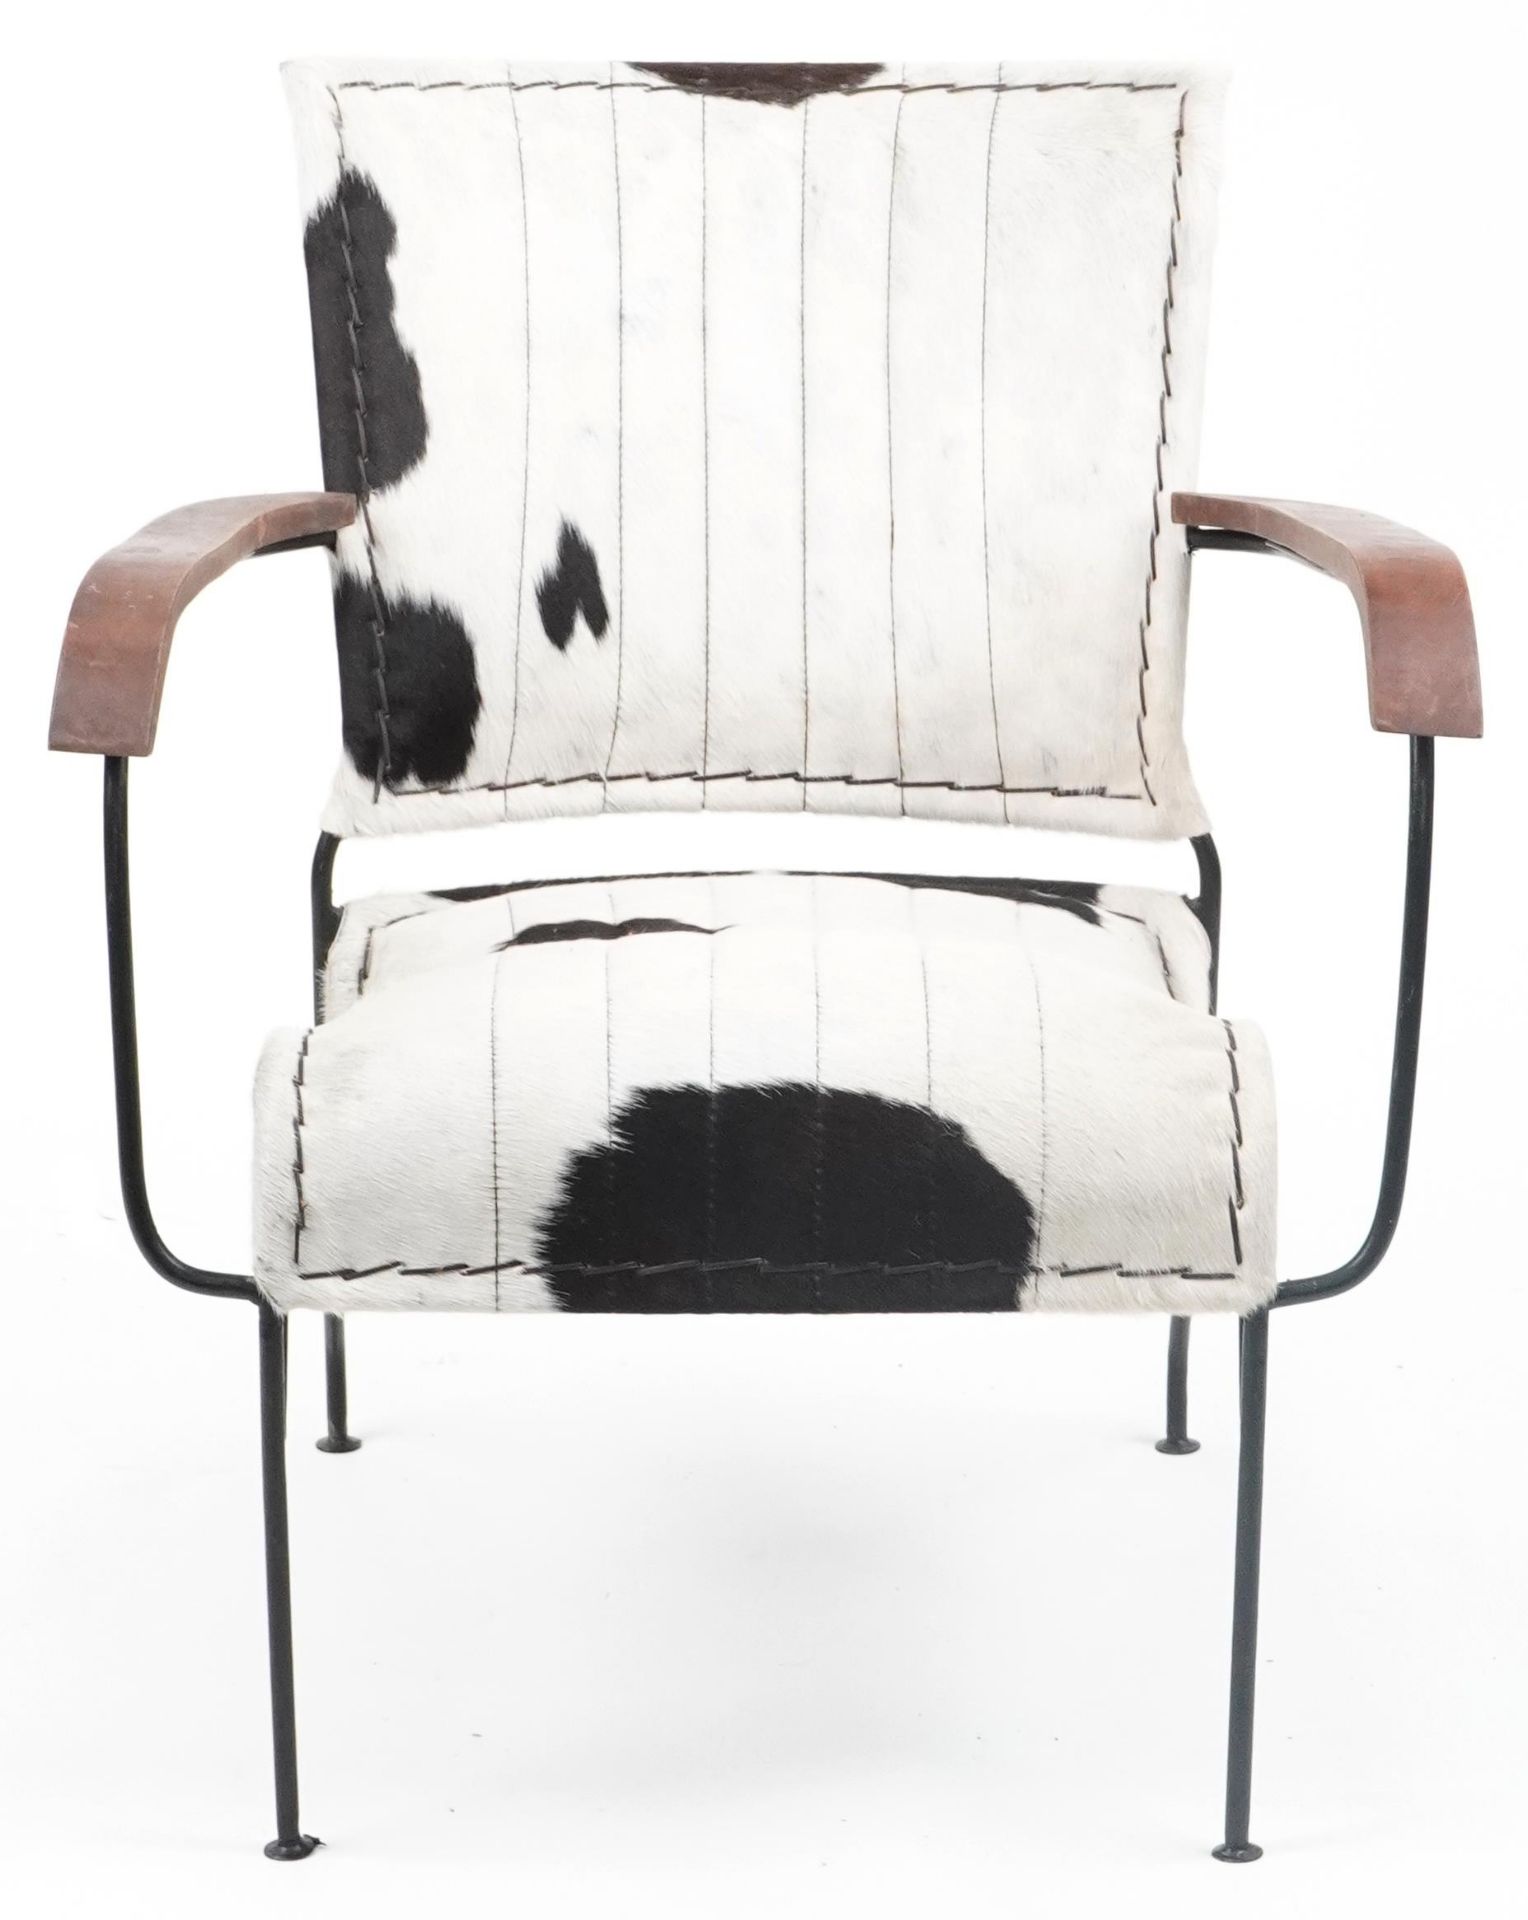 Brutalist style wrought iron and cow hide armchair, 75cm high - Image 2 of 4